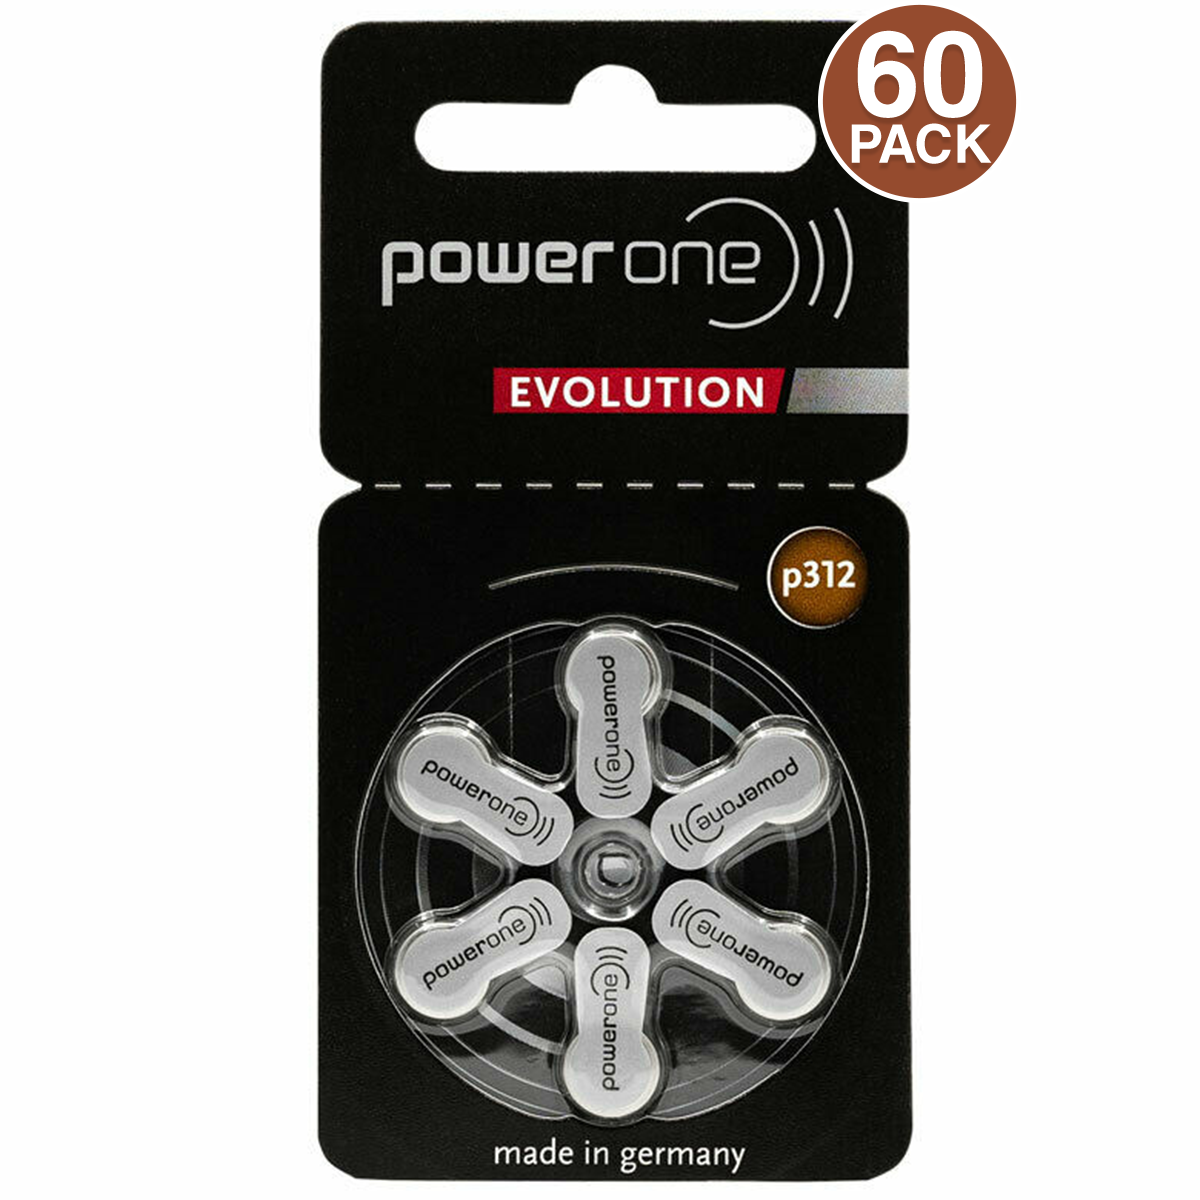 Power One Evolution Size 312 Hearing Aid Batteries (60 PCS)